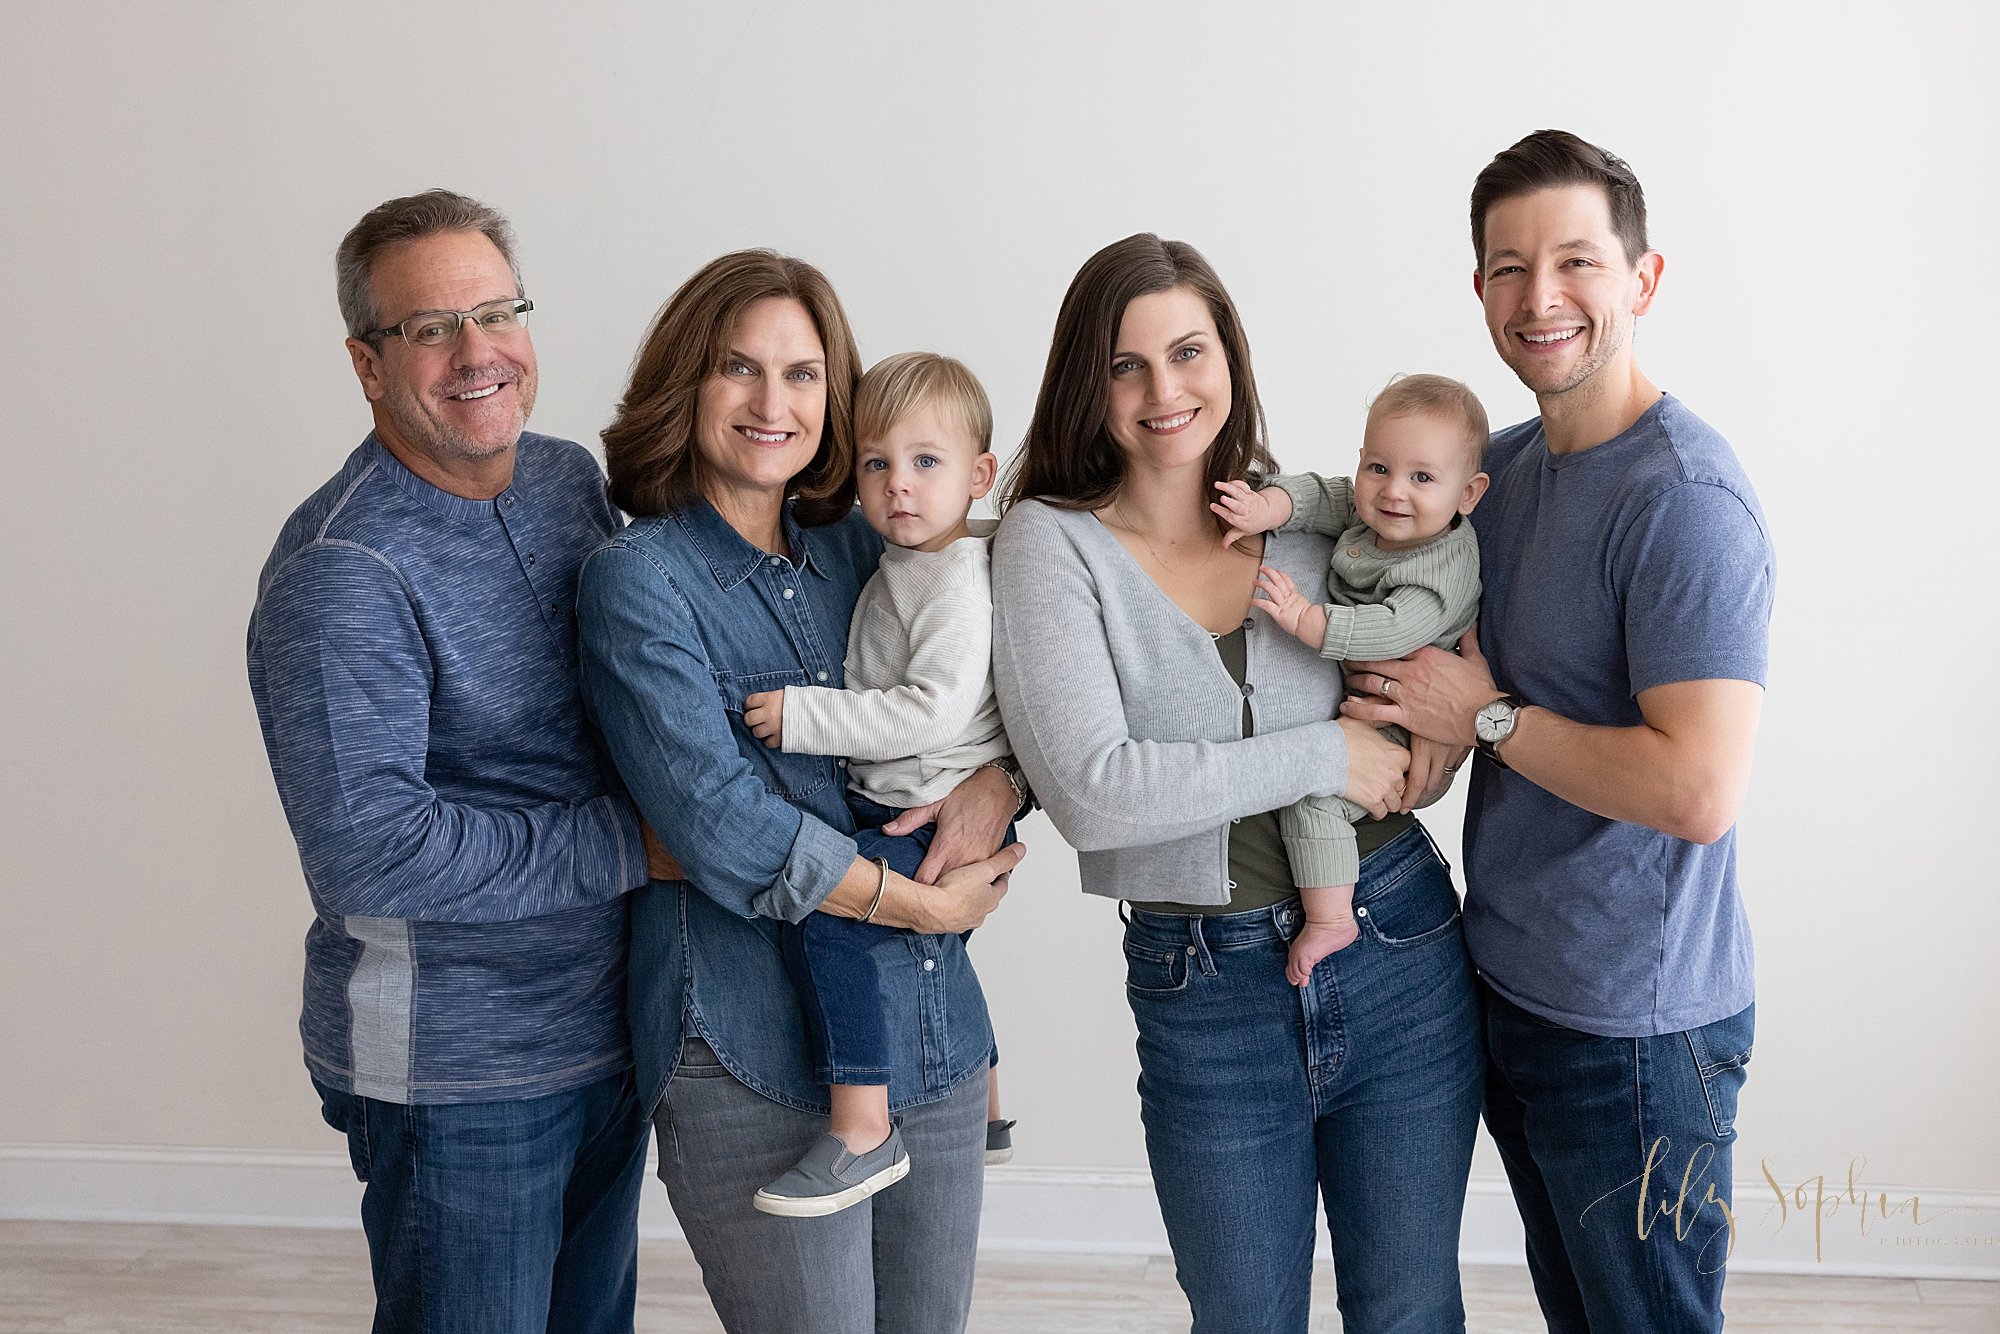  Multi-generational family portrait of a grandfather standing next to his wife who is holding their toddler grandson in her arms as she stands next to her daughter who is holding her baby boy in her harms as her husband stands beside her taken using 